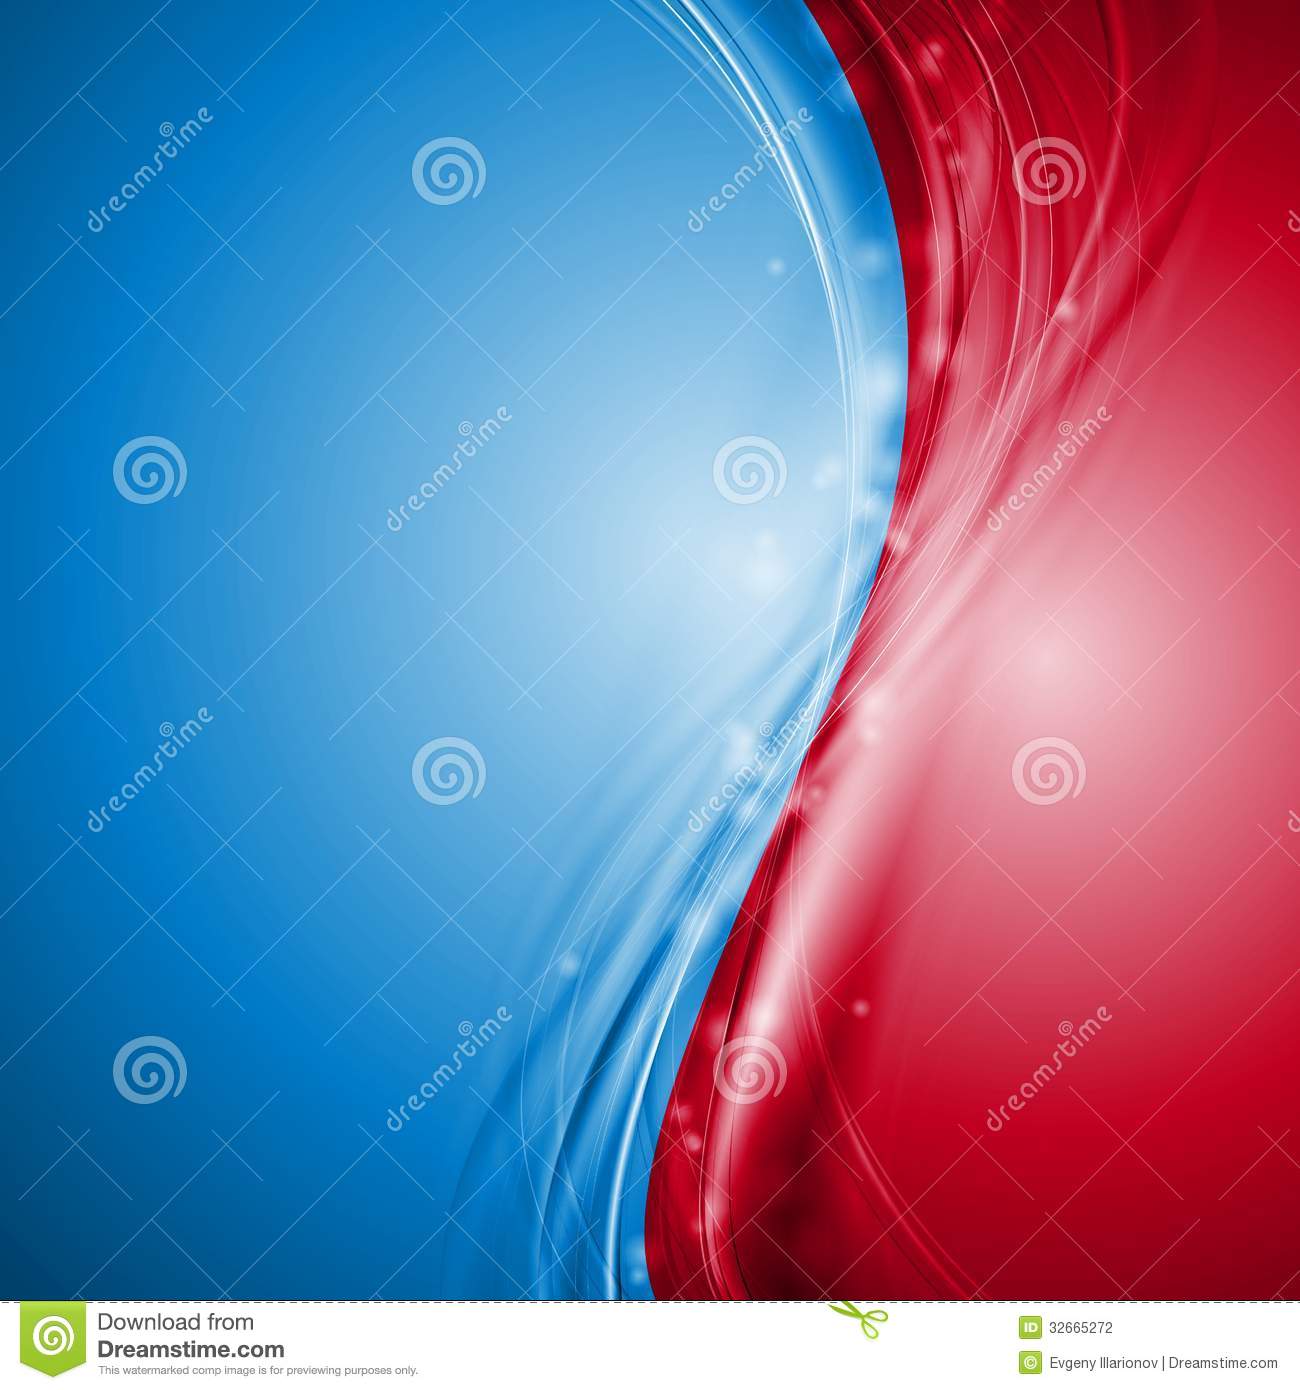 Red and Blue Abstract Design